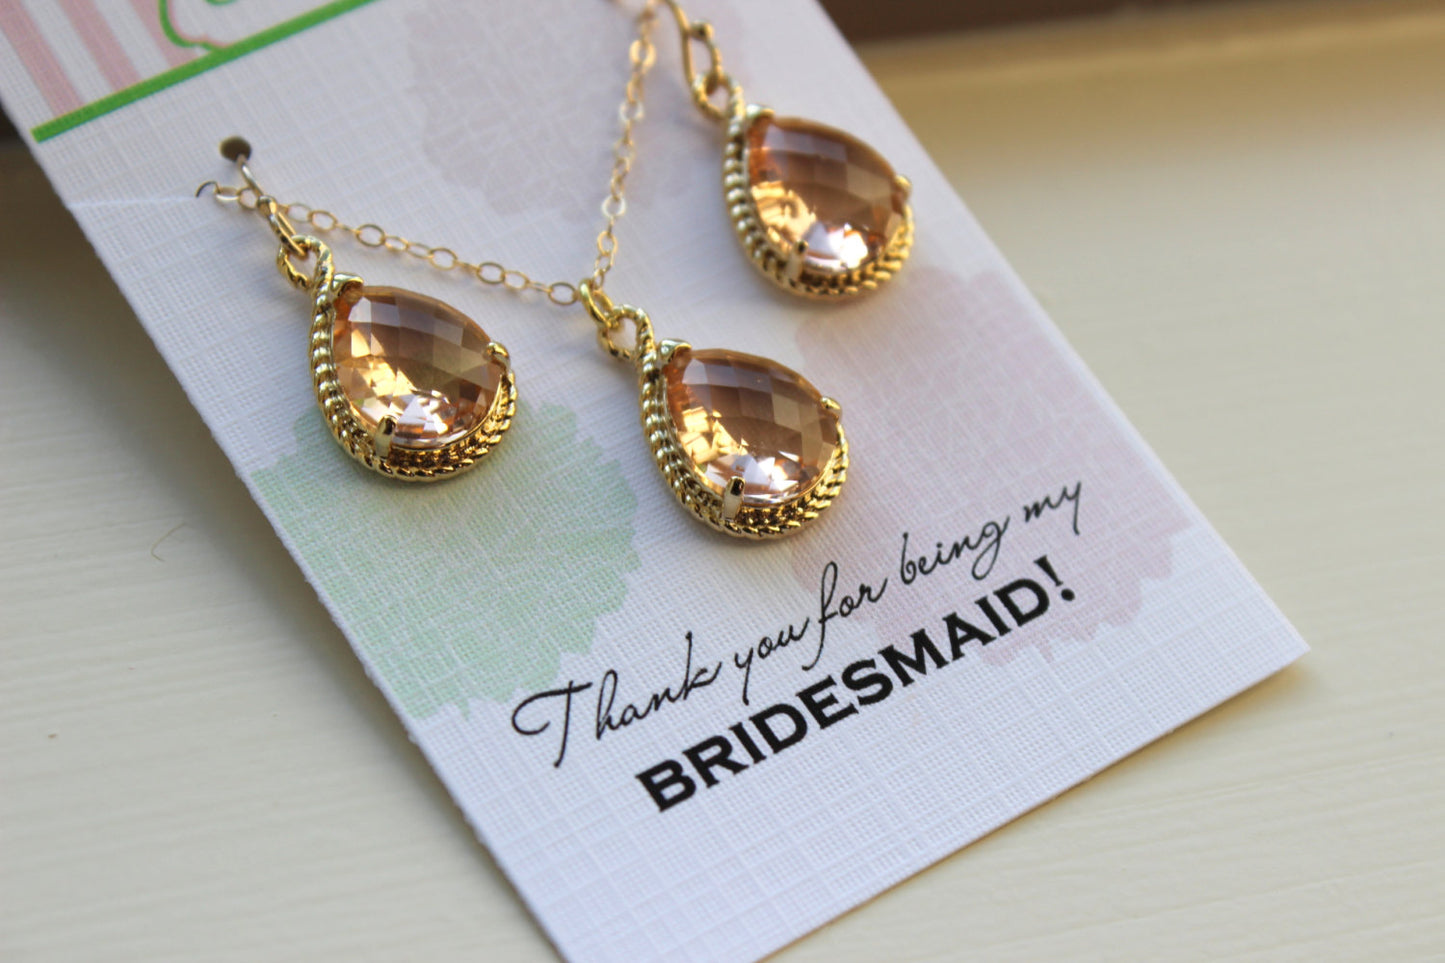 Blush Earring Necklace Set Gold - Champagne Peach Wedding Jewelry - Pink Bridesmaid Jewelry Gift Blush Bridal Jewelry Personalized Note Card